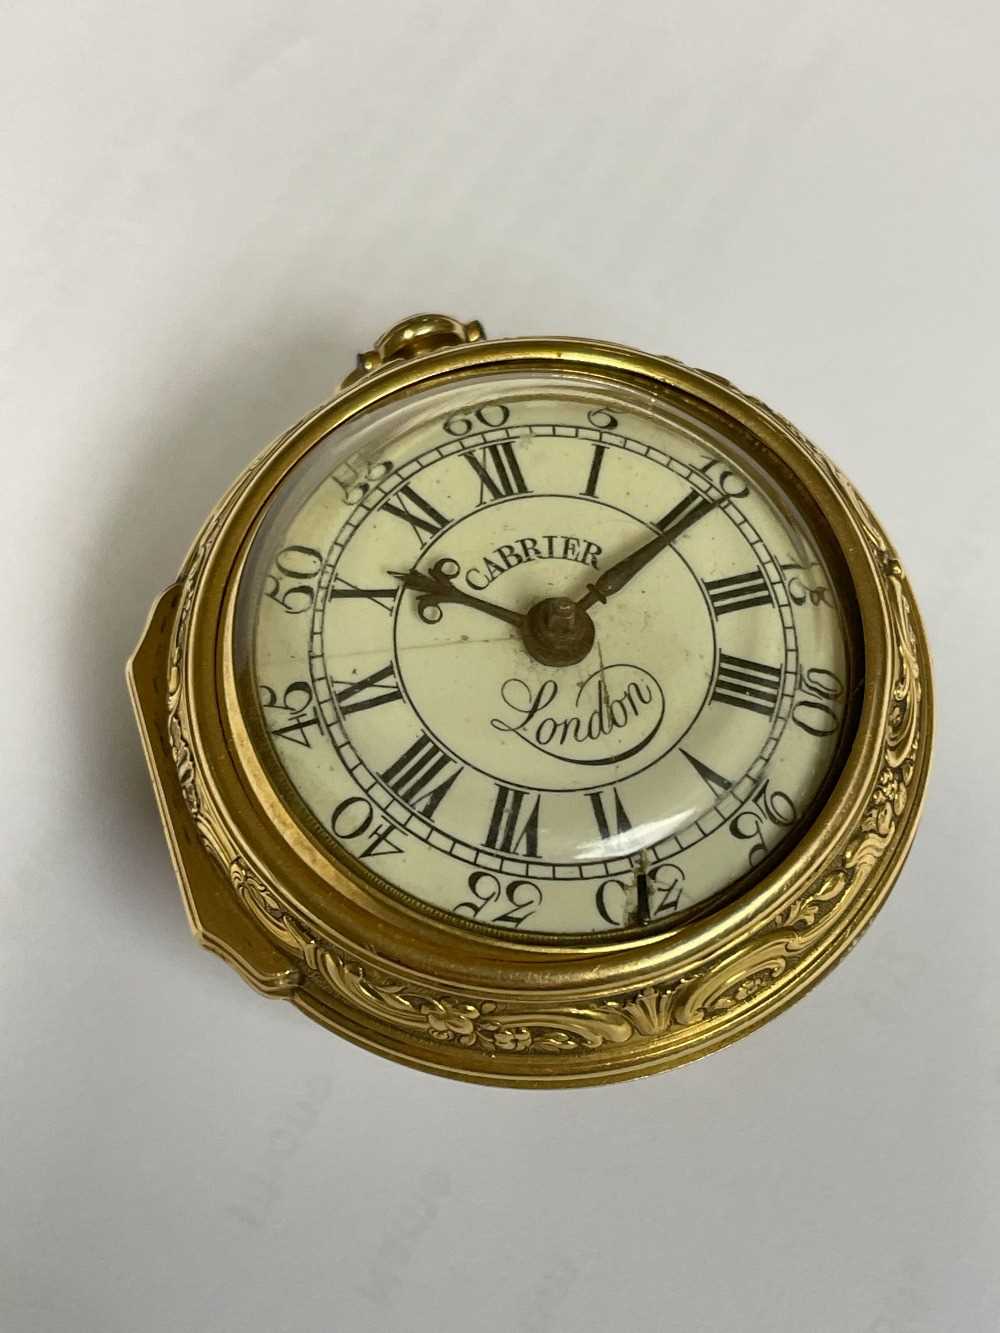 MID-18TH C. GOLD PAIR CASED POCKET WATCH, Charles Cabrier, London 1750, with white enamel dial, - Image 3 of 12